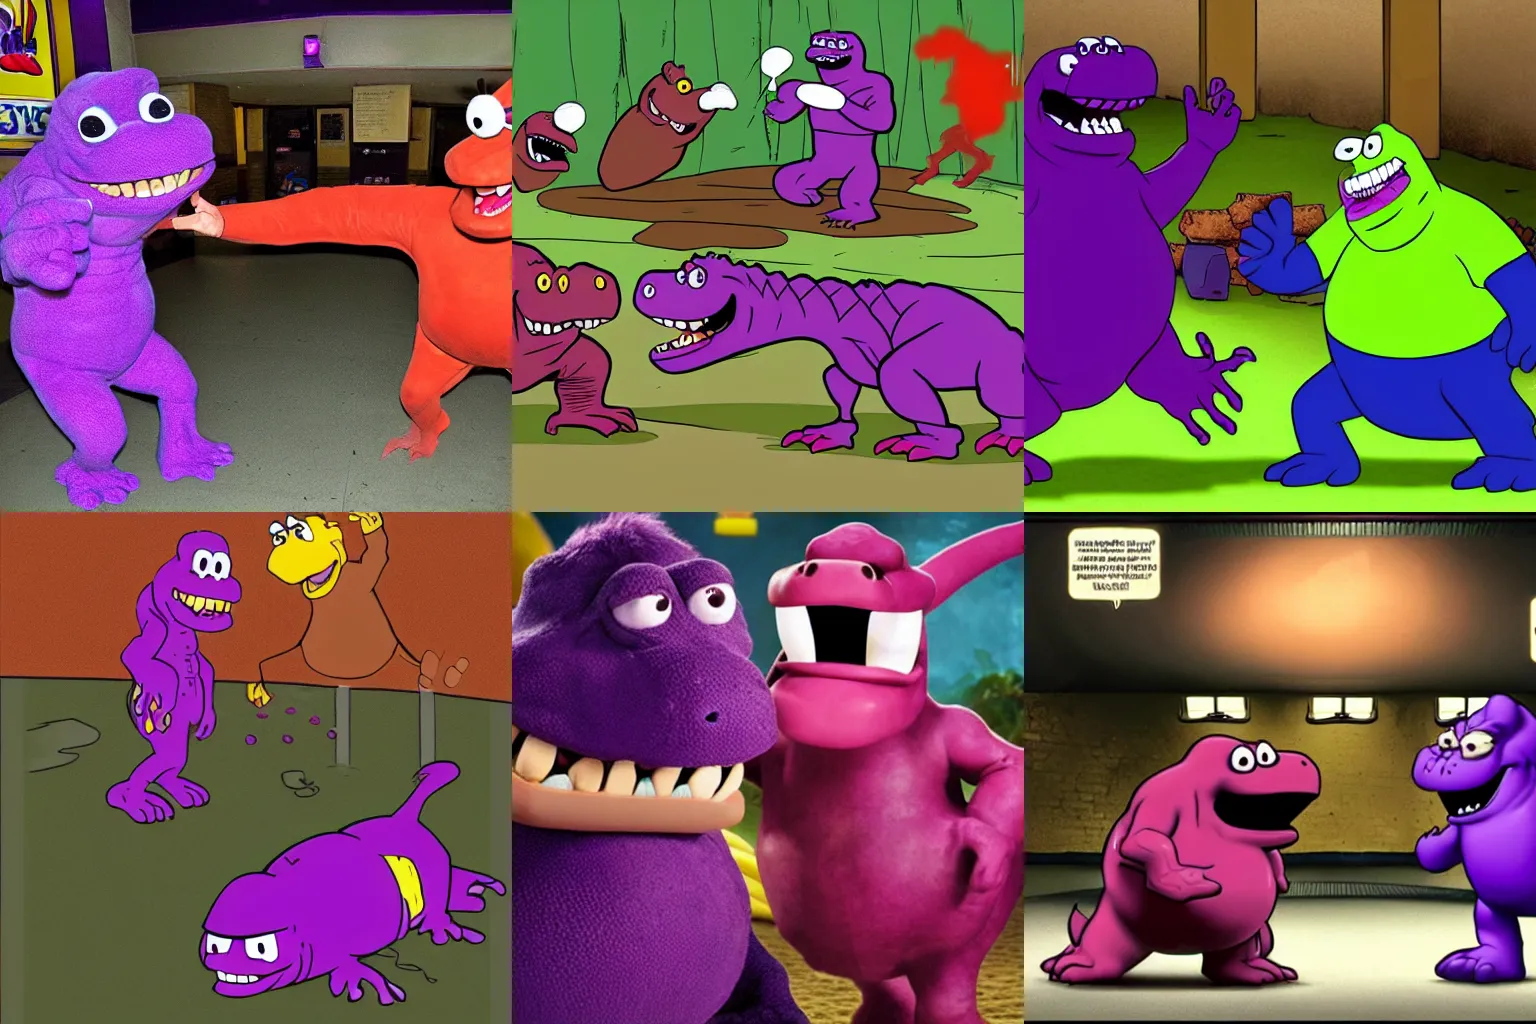 Prompt: Barney the dinosaur and Grimace from McDonalds fighting in an underground fight club.